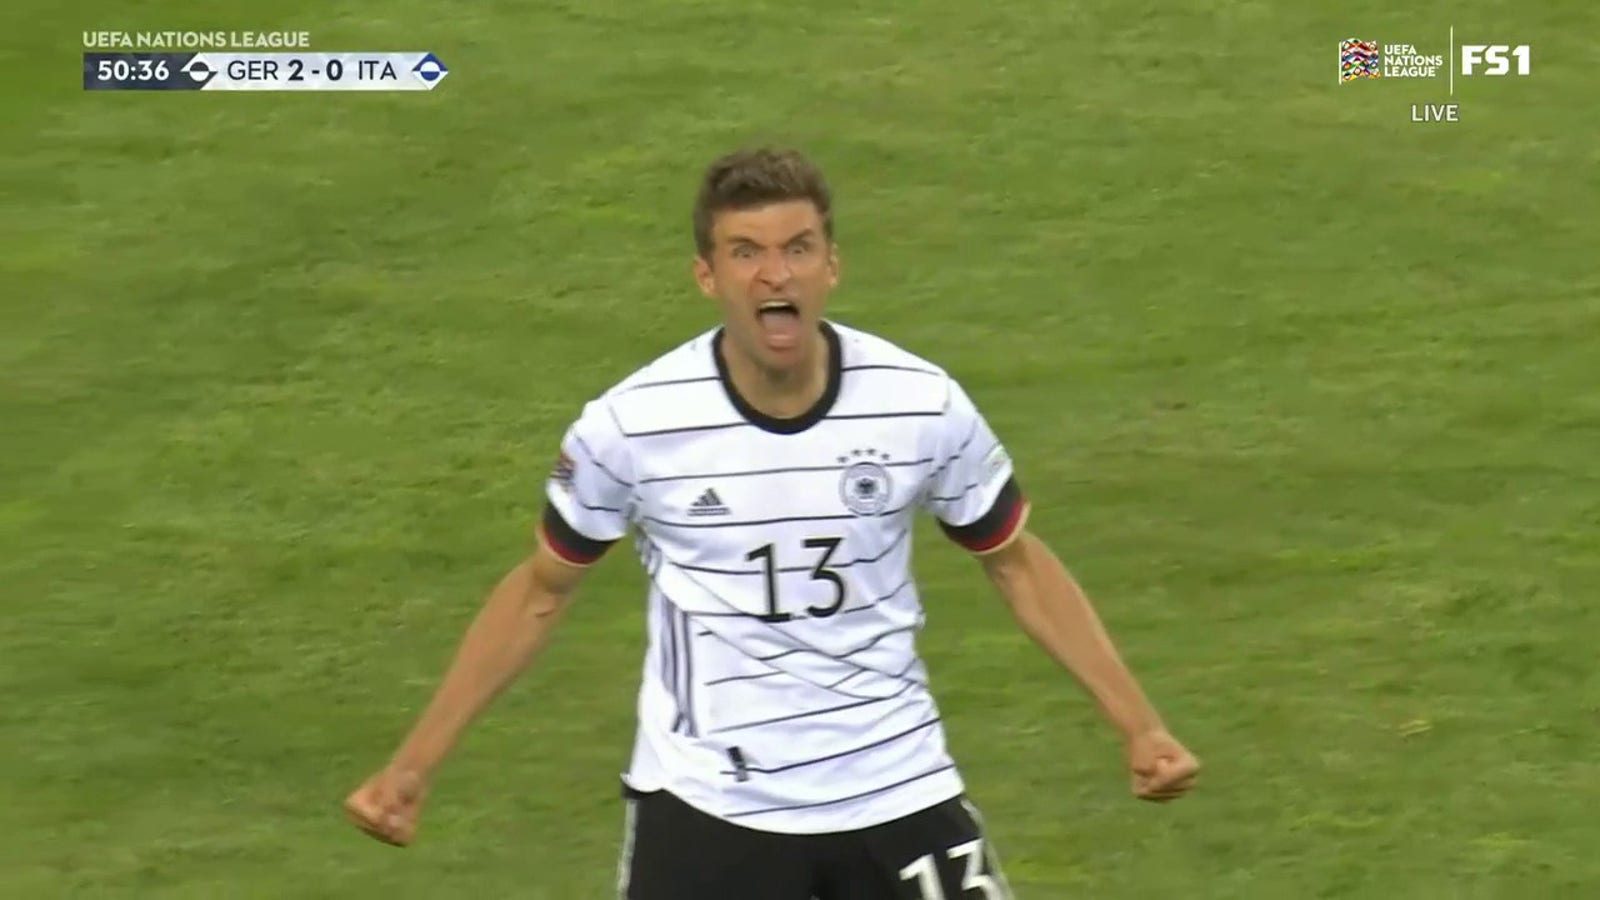 Thomas Müller finishes the job after a lucky bounce, 3-0